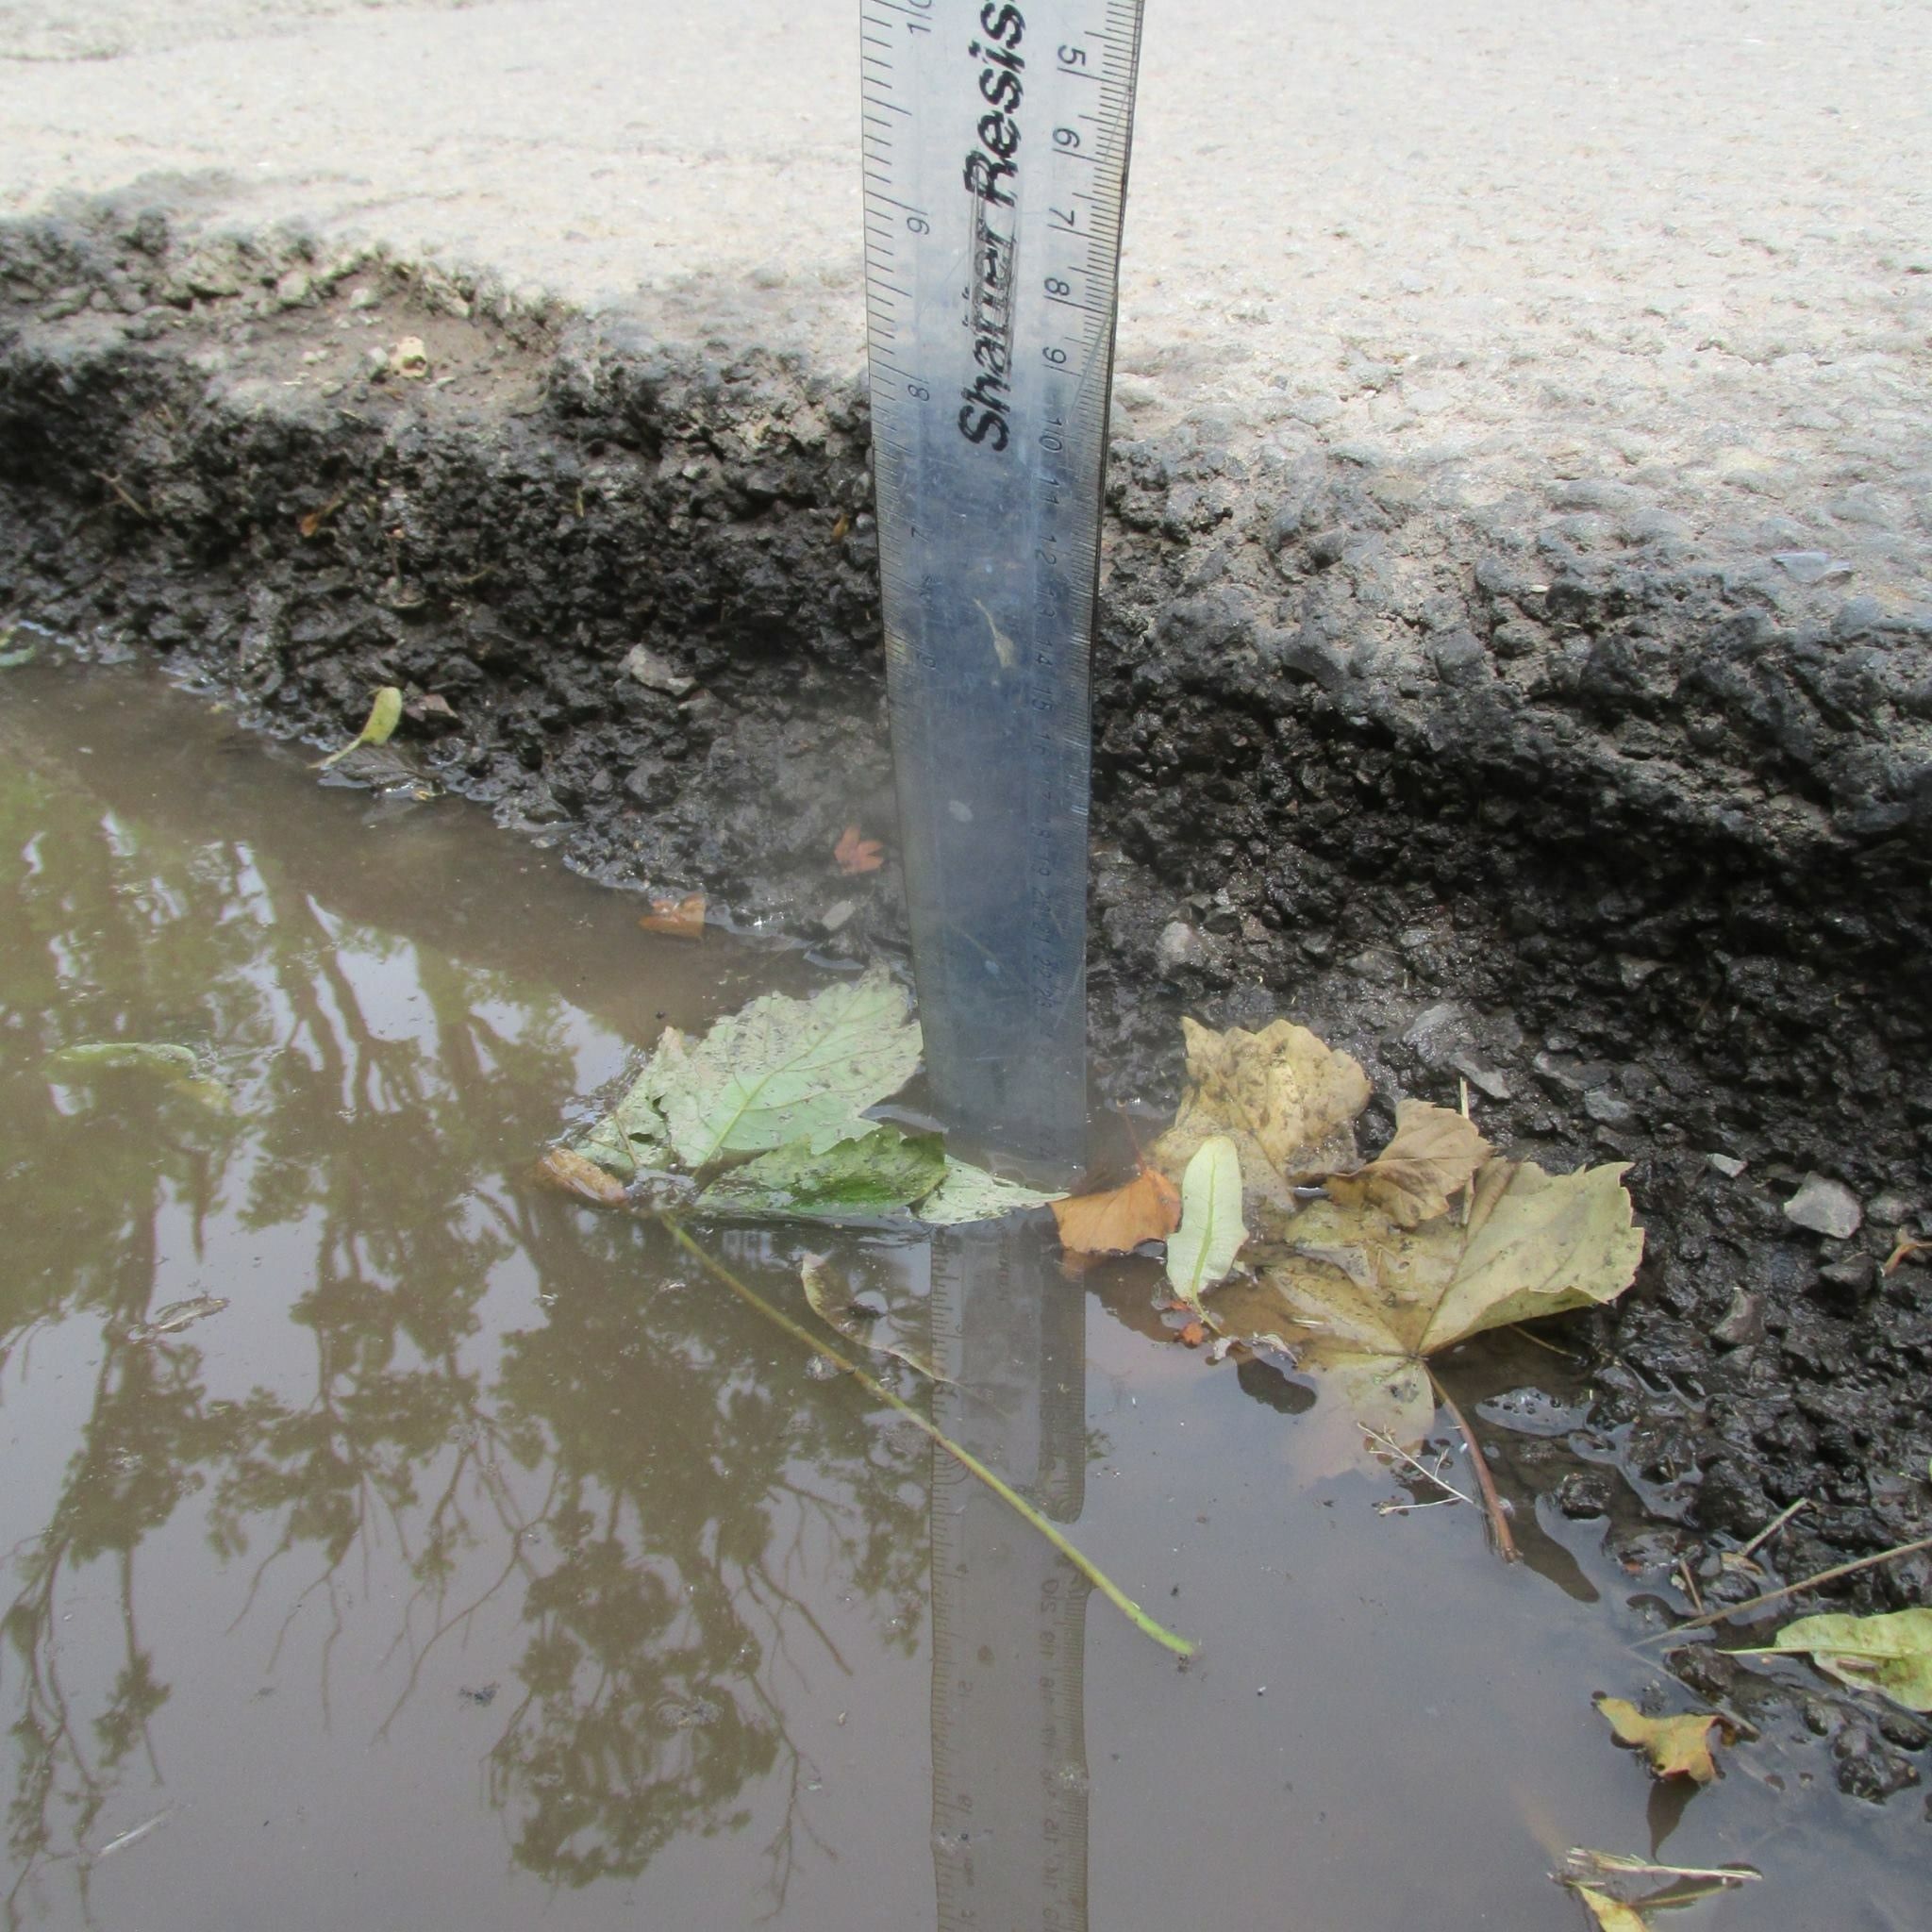 Ruler eight inches deep in pothole